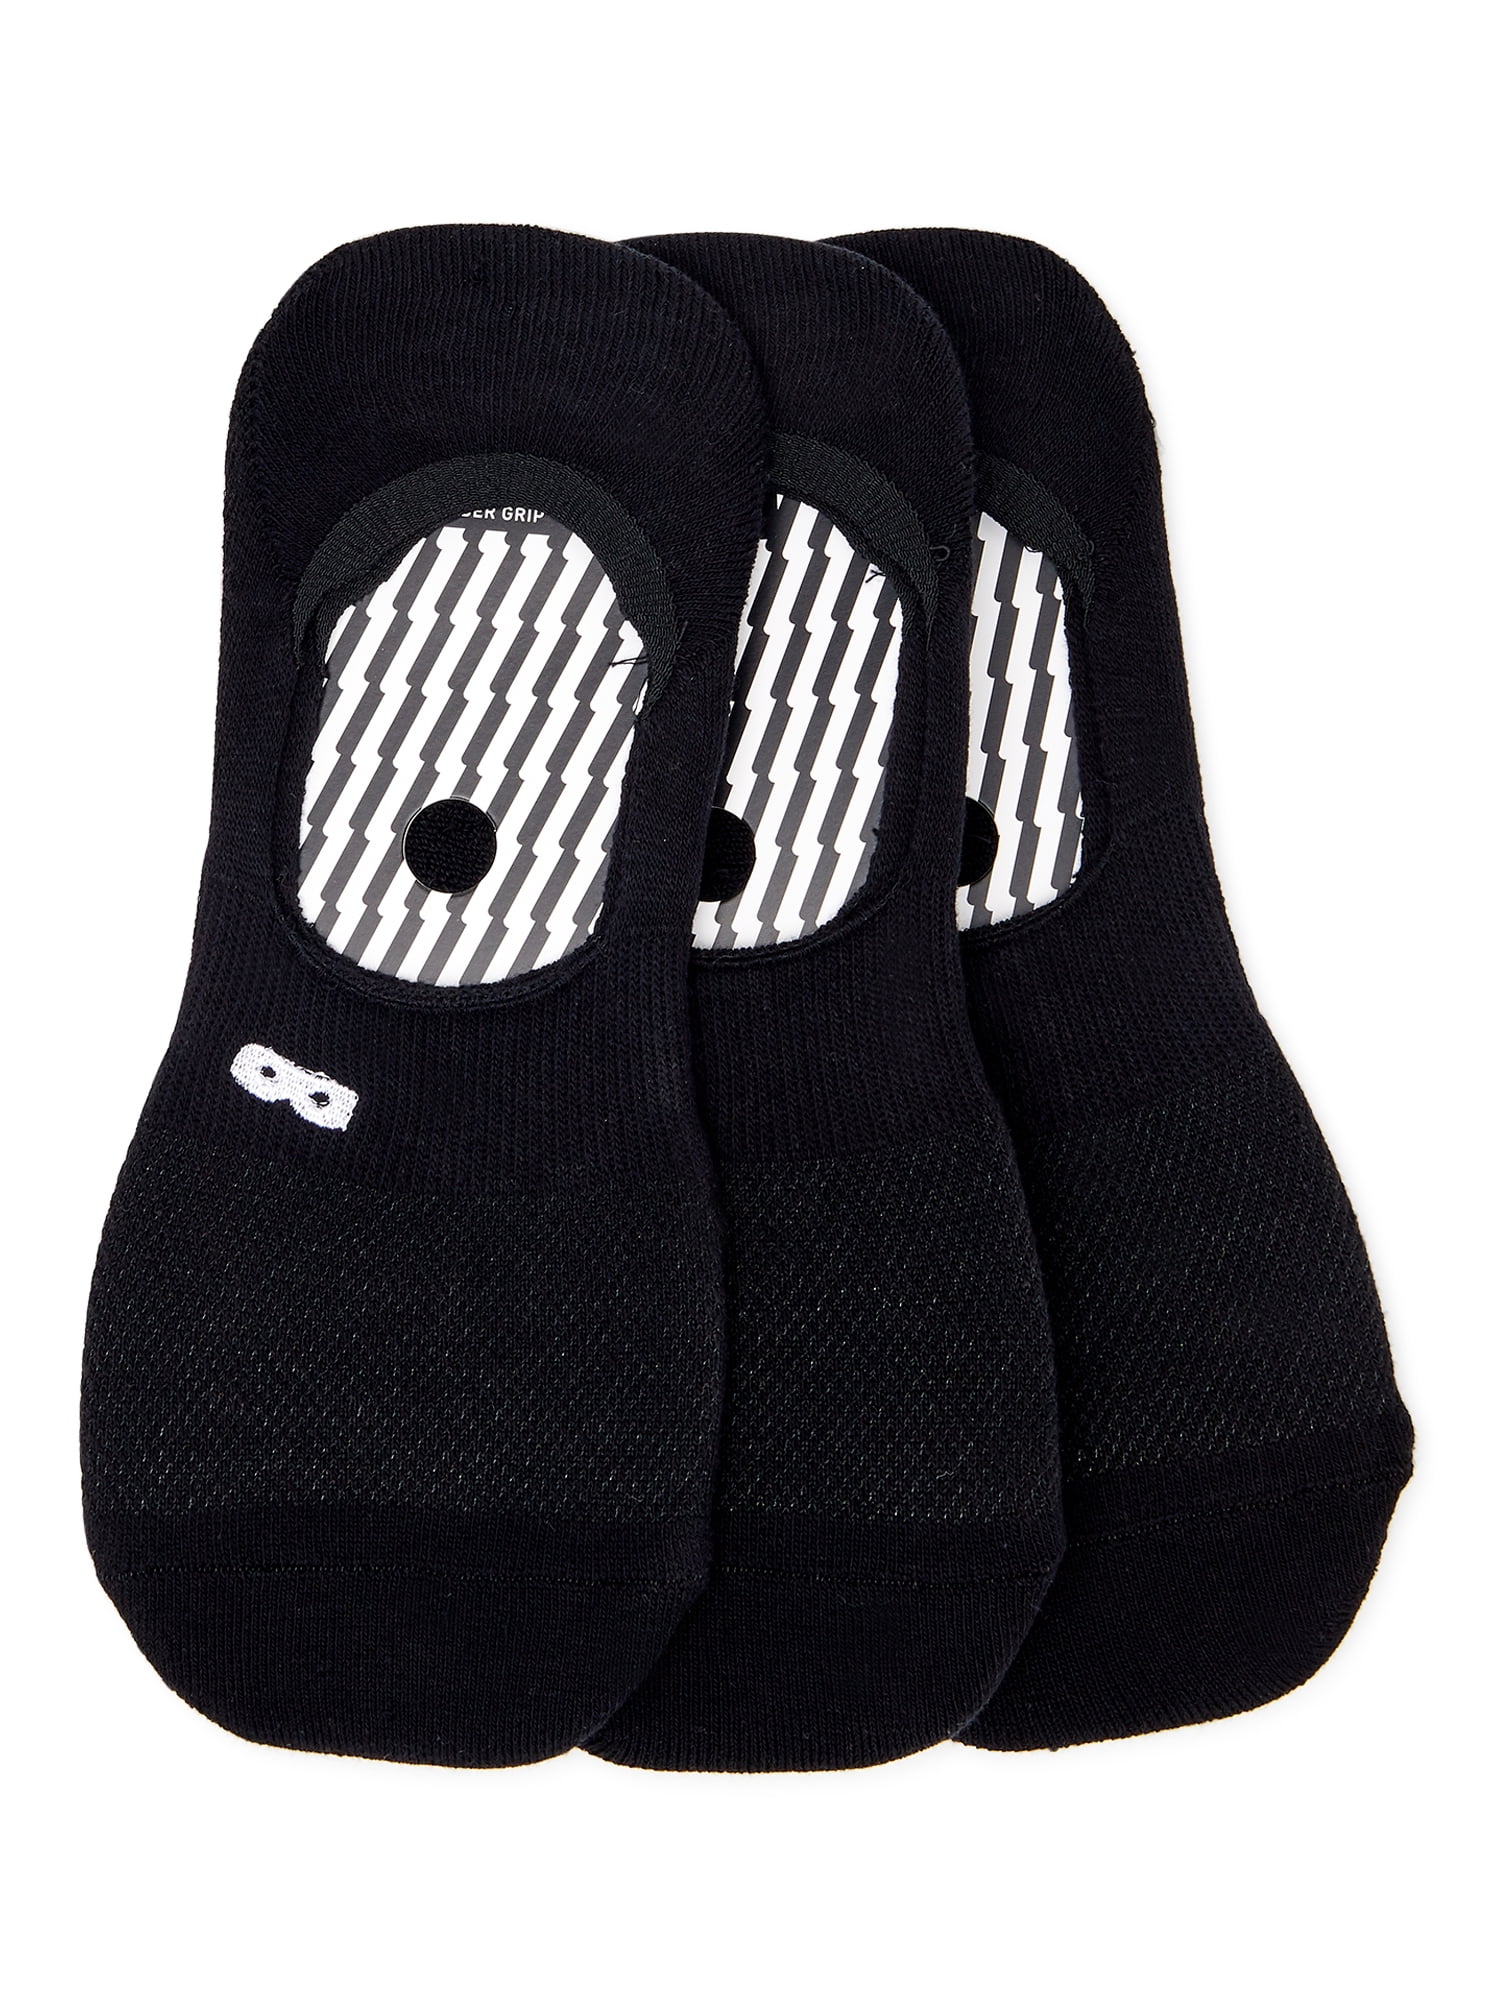 Pair of Thieves Blackout/Whiteout Cushion No-Show Sock Men's 3-Pack